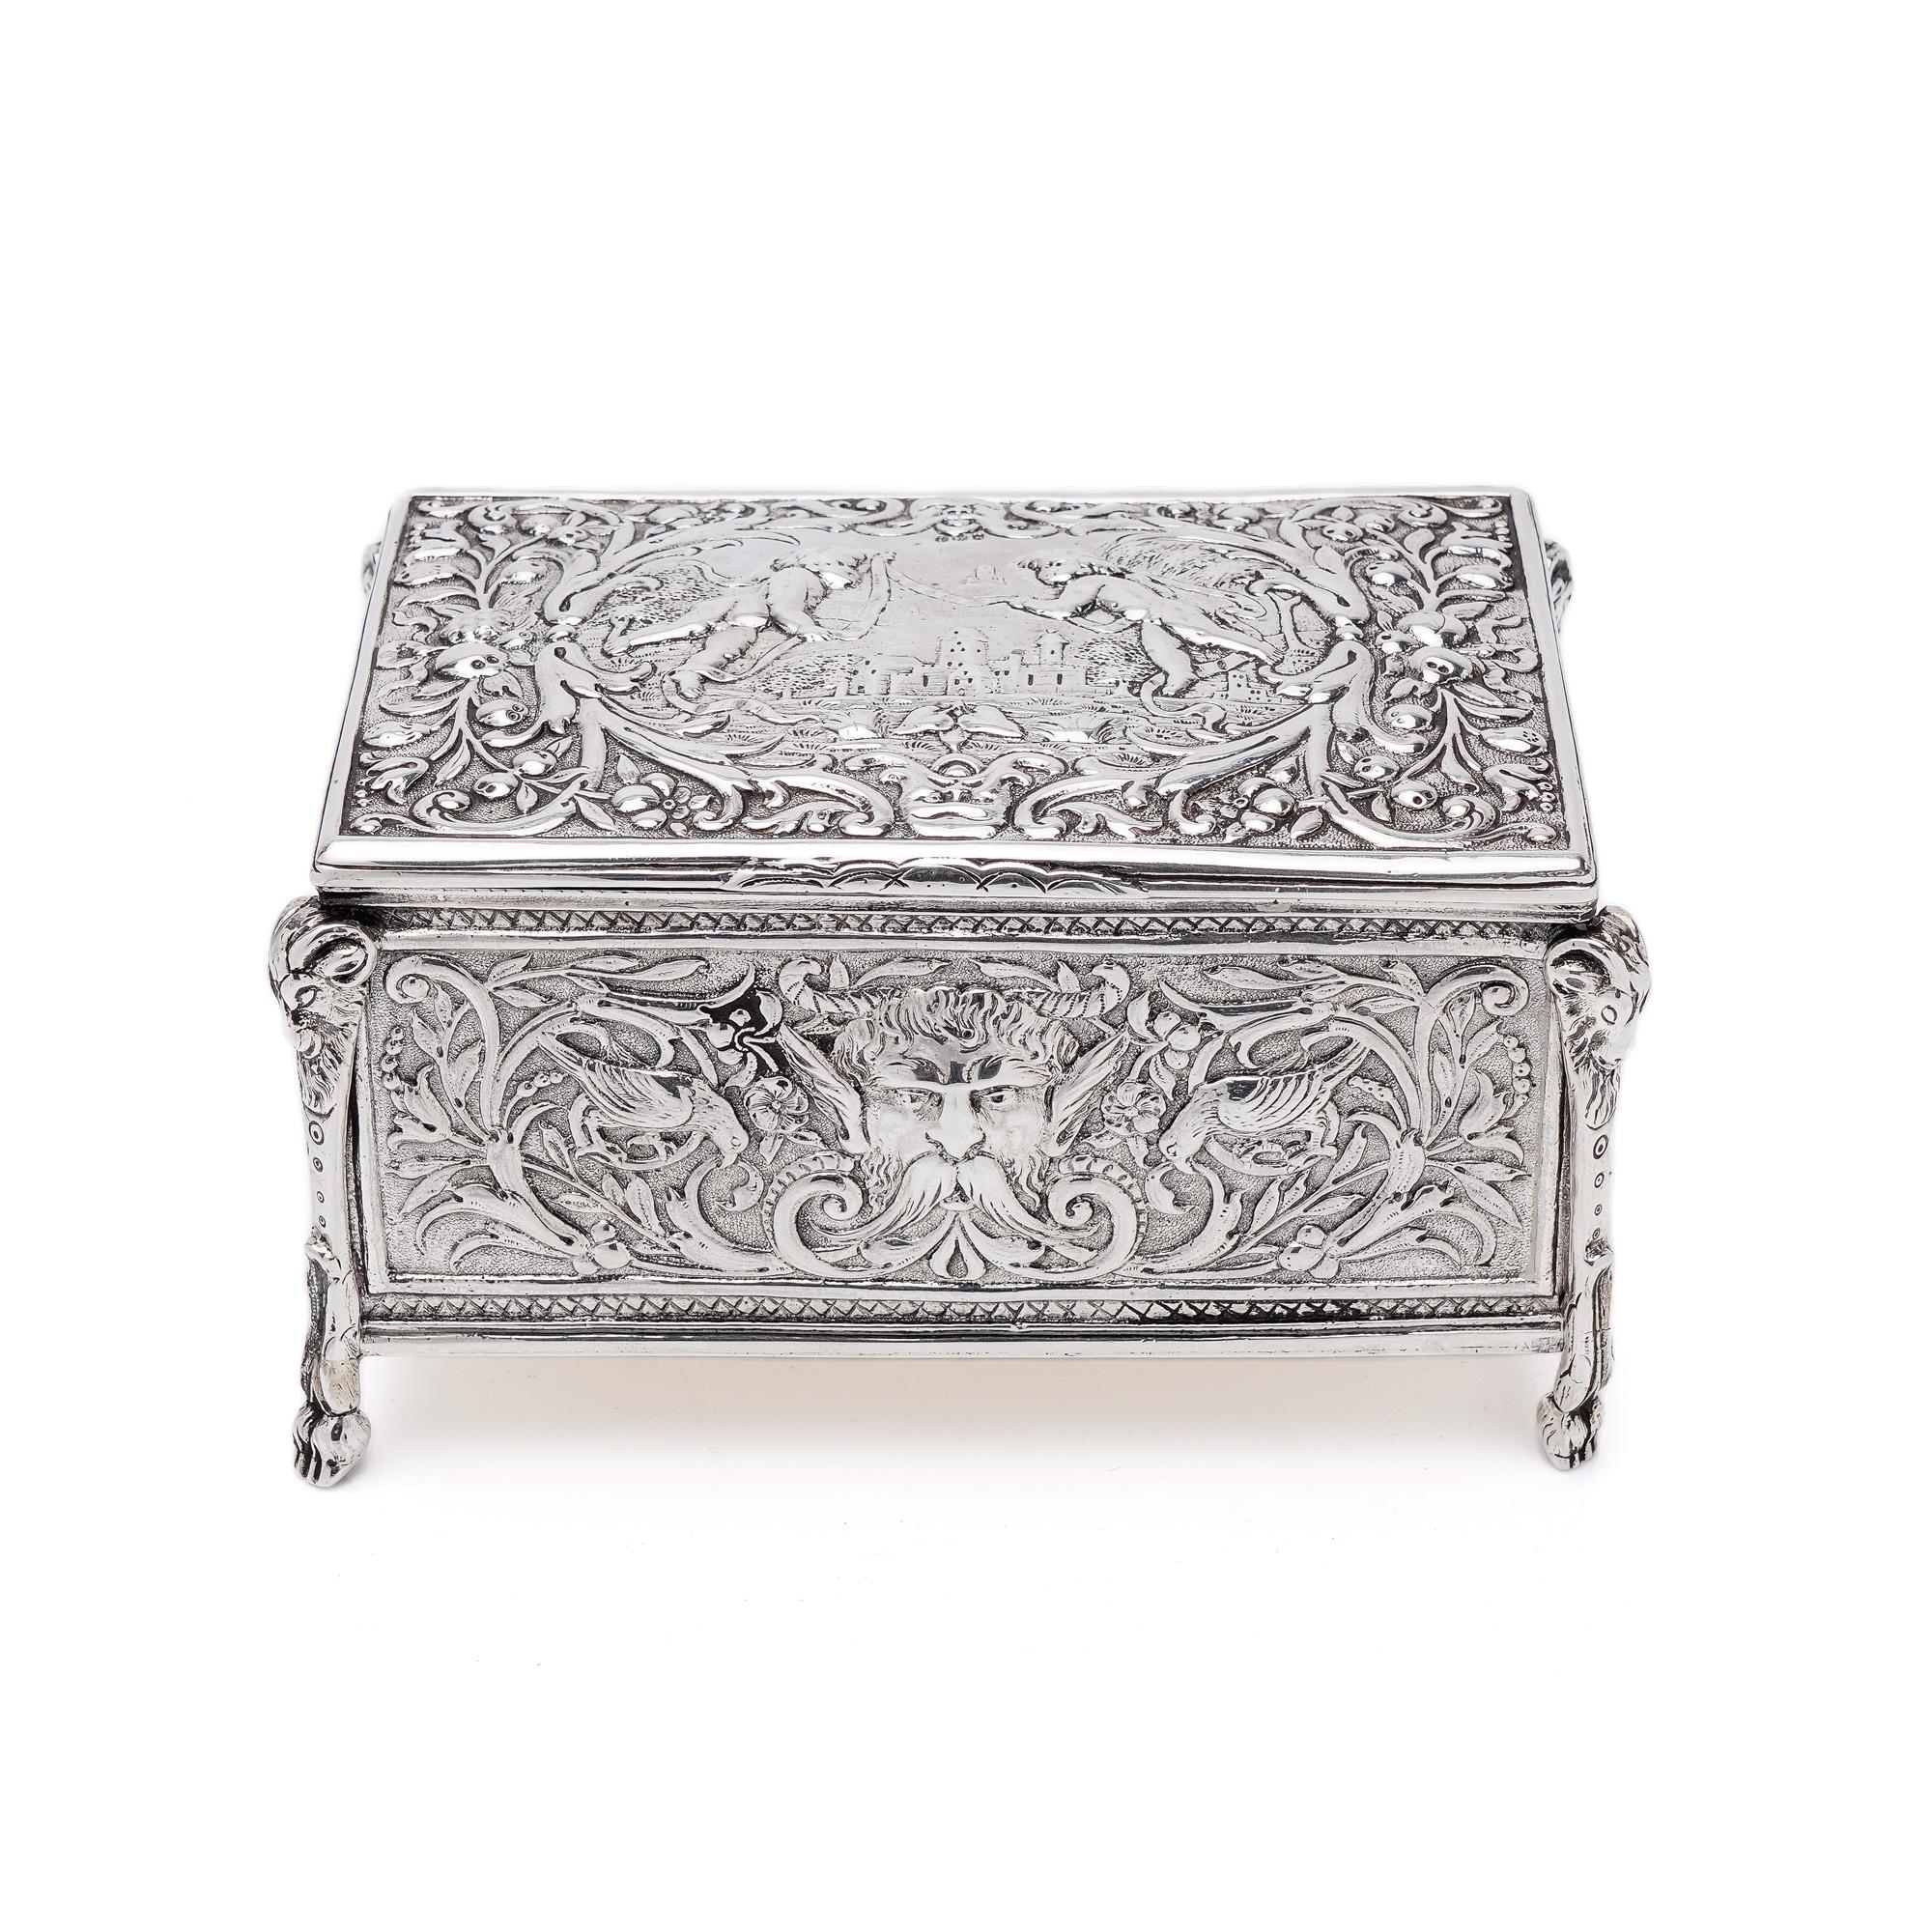 Antique Late 19th century silver repoussé decorated jewellery box with Cherubs, Forest God in the centre surrounded by the birds and floral motifs .

Interior is decorated with green velvet.

Lid top is decorated with two Cherubs ( Putti )